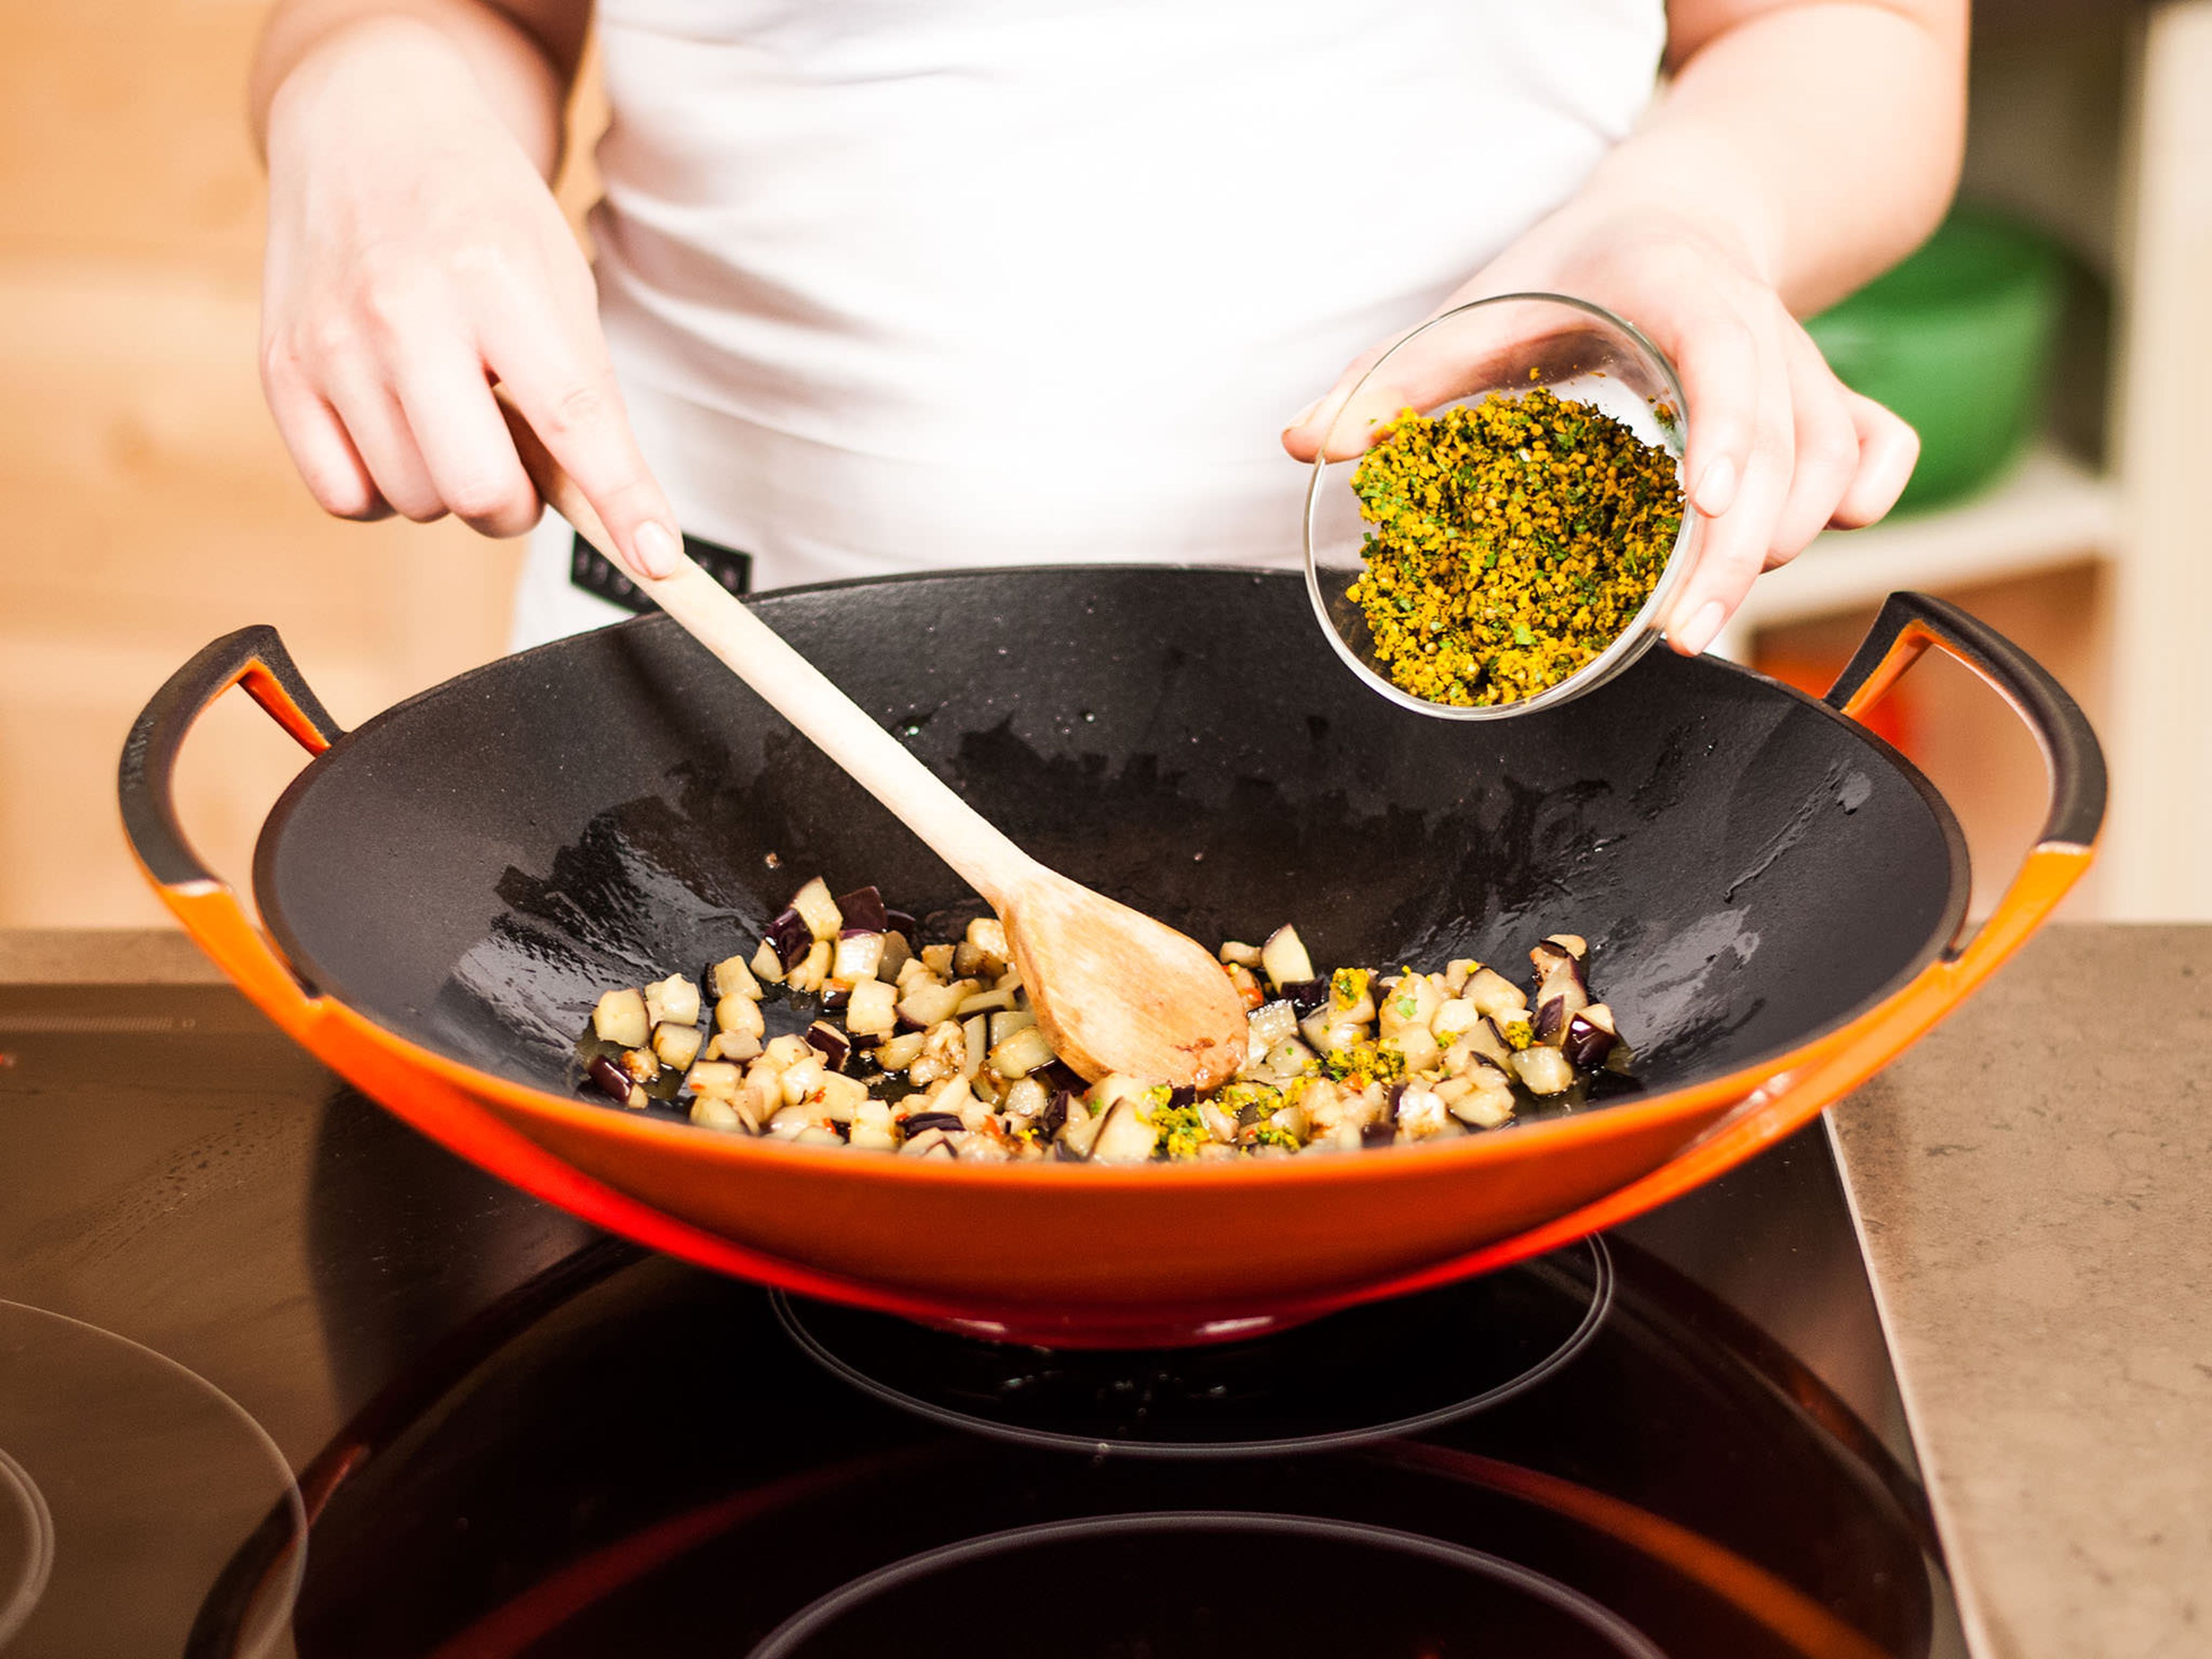 Add prepared curry paste and fry for approx. 2 – 3 min. to build intense flavor.